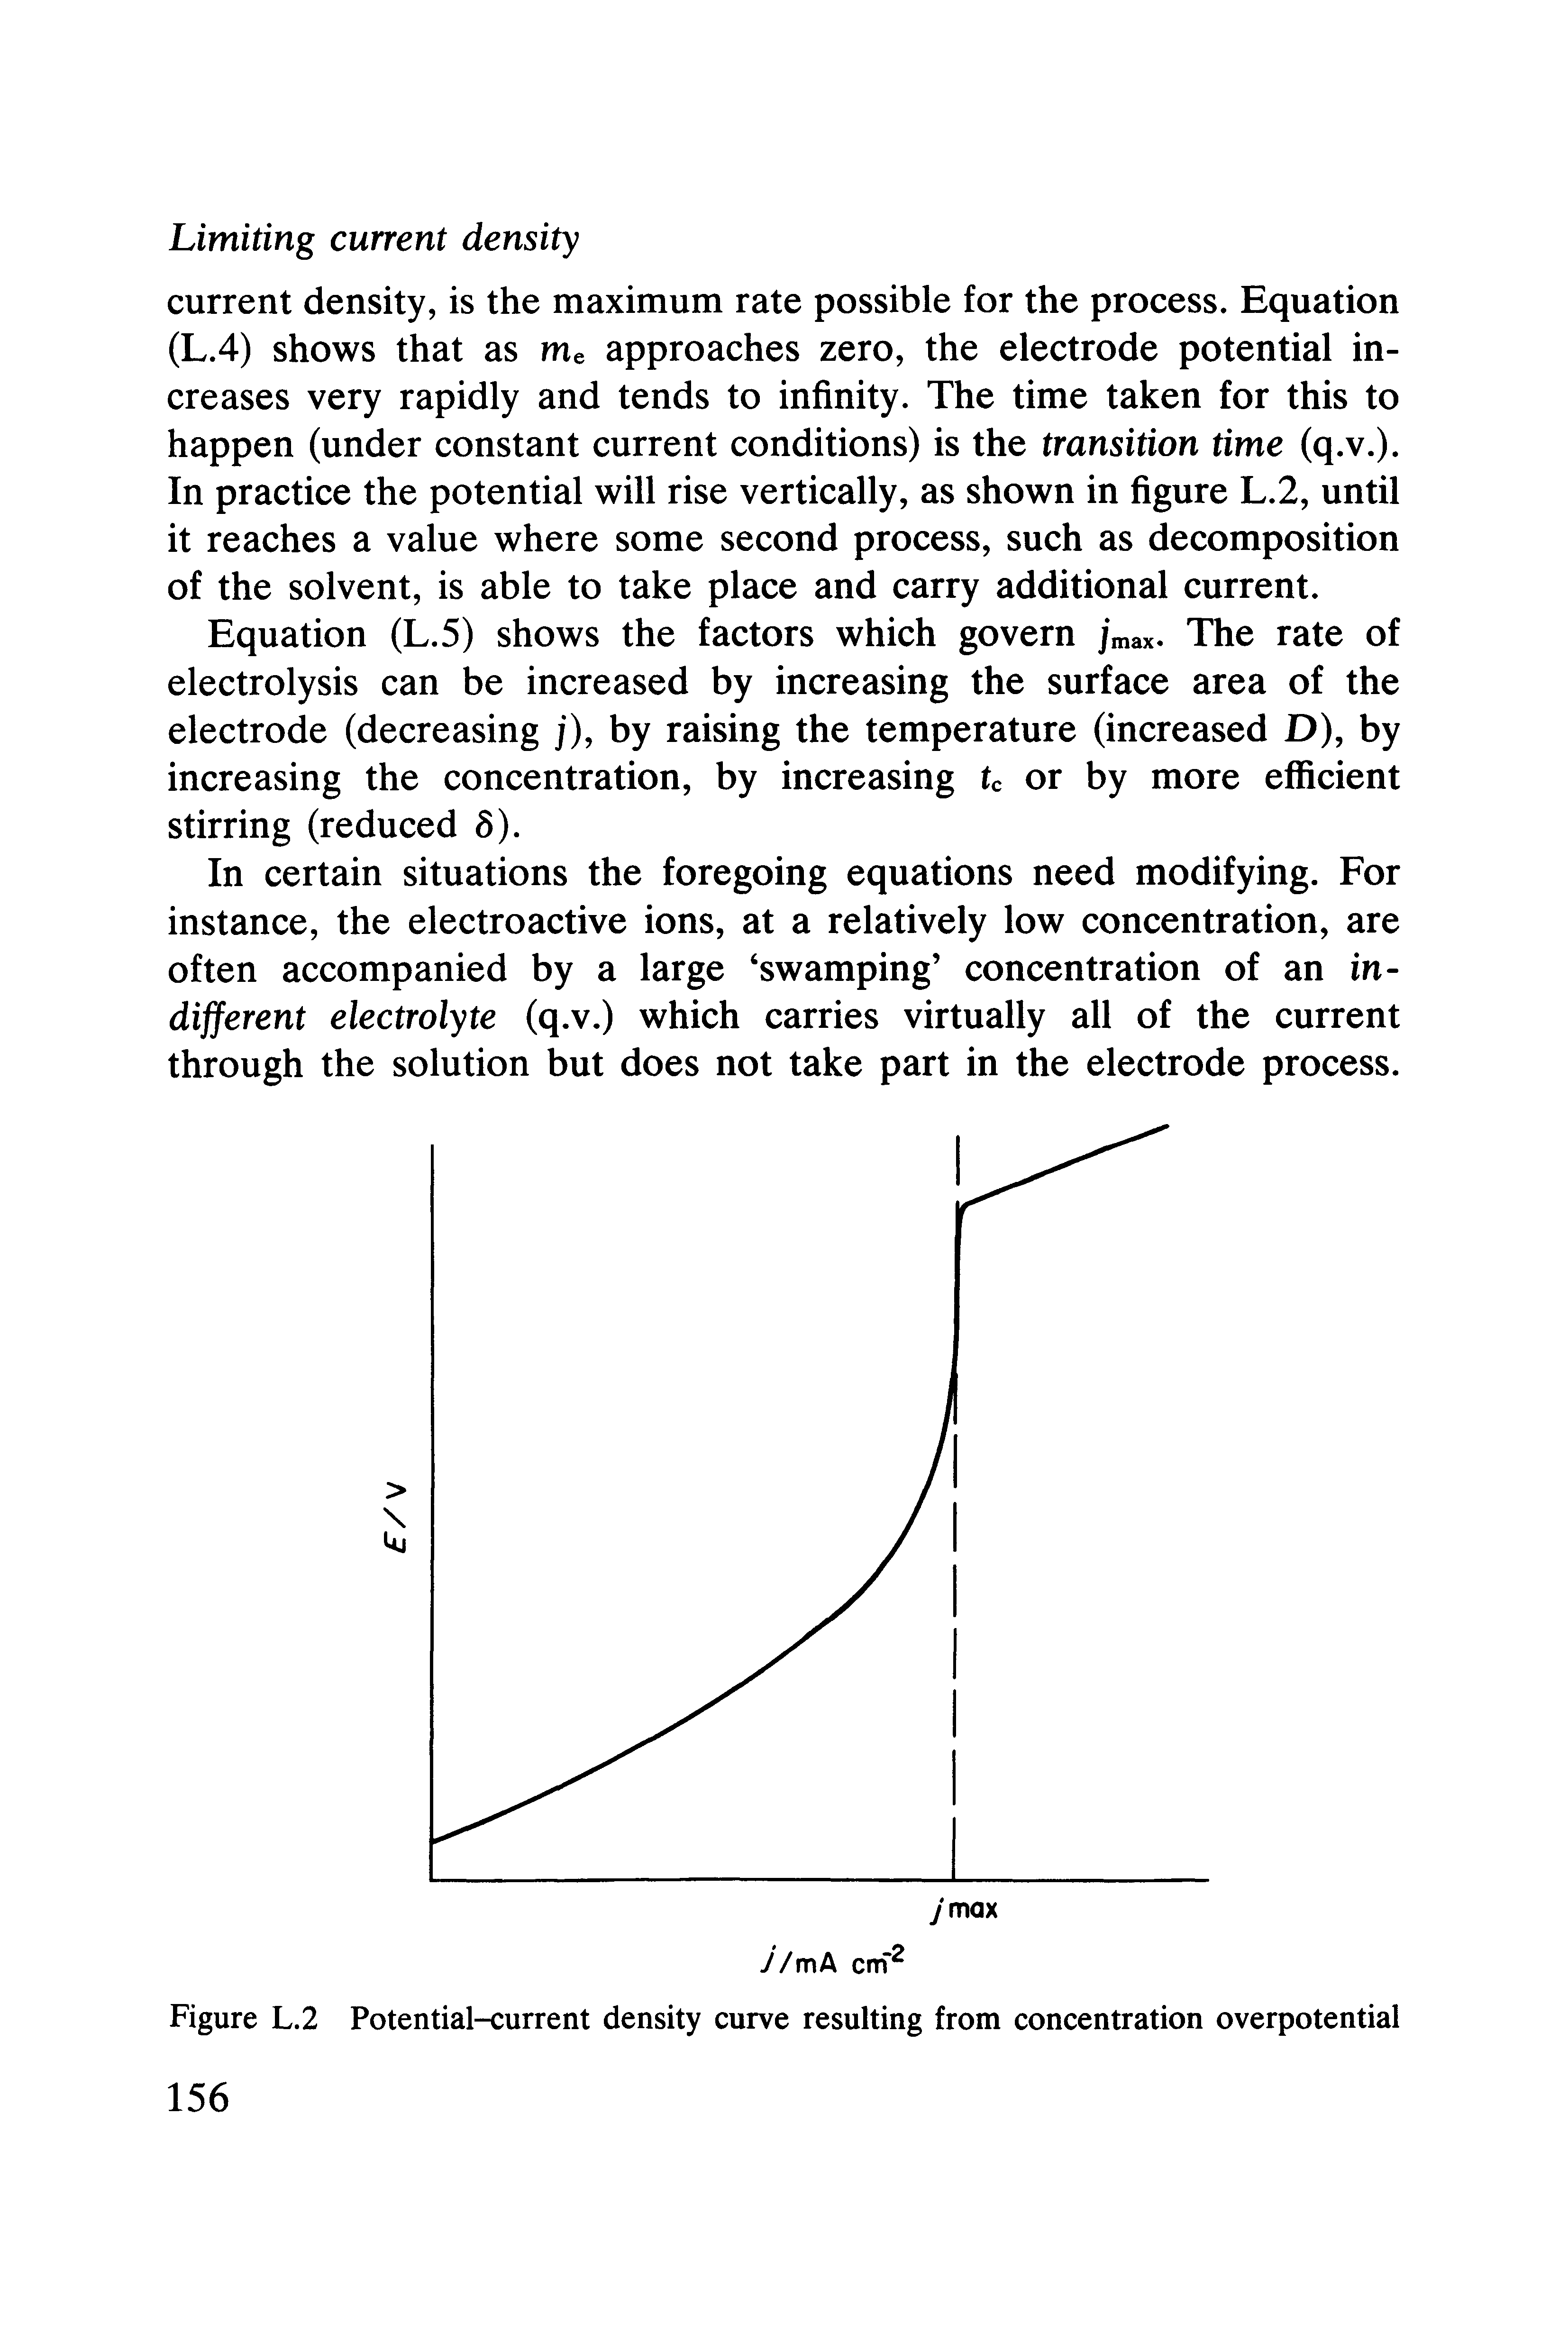 Figure L.2 Potential-current density curve resulting from concentration overpotential...